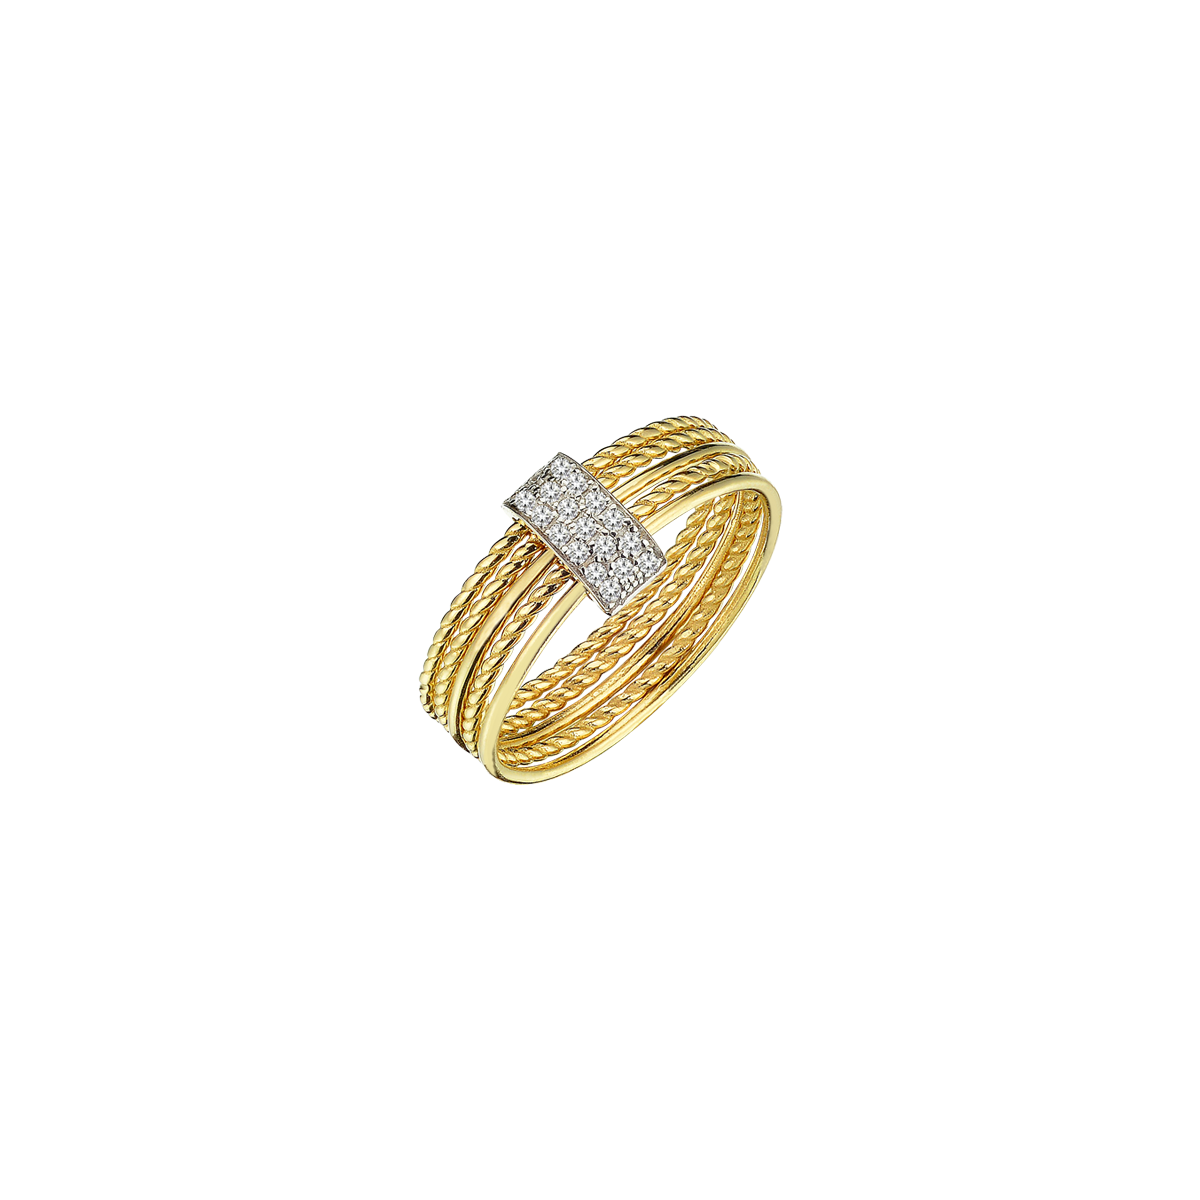 Mini Attached Coils Ring in Yellow Gold - Her Story Shop